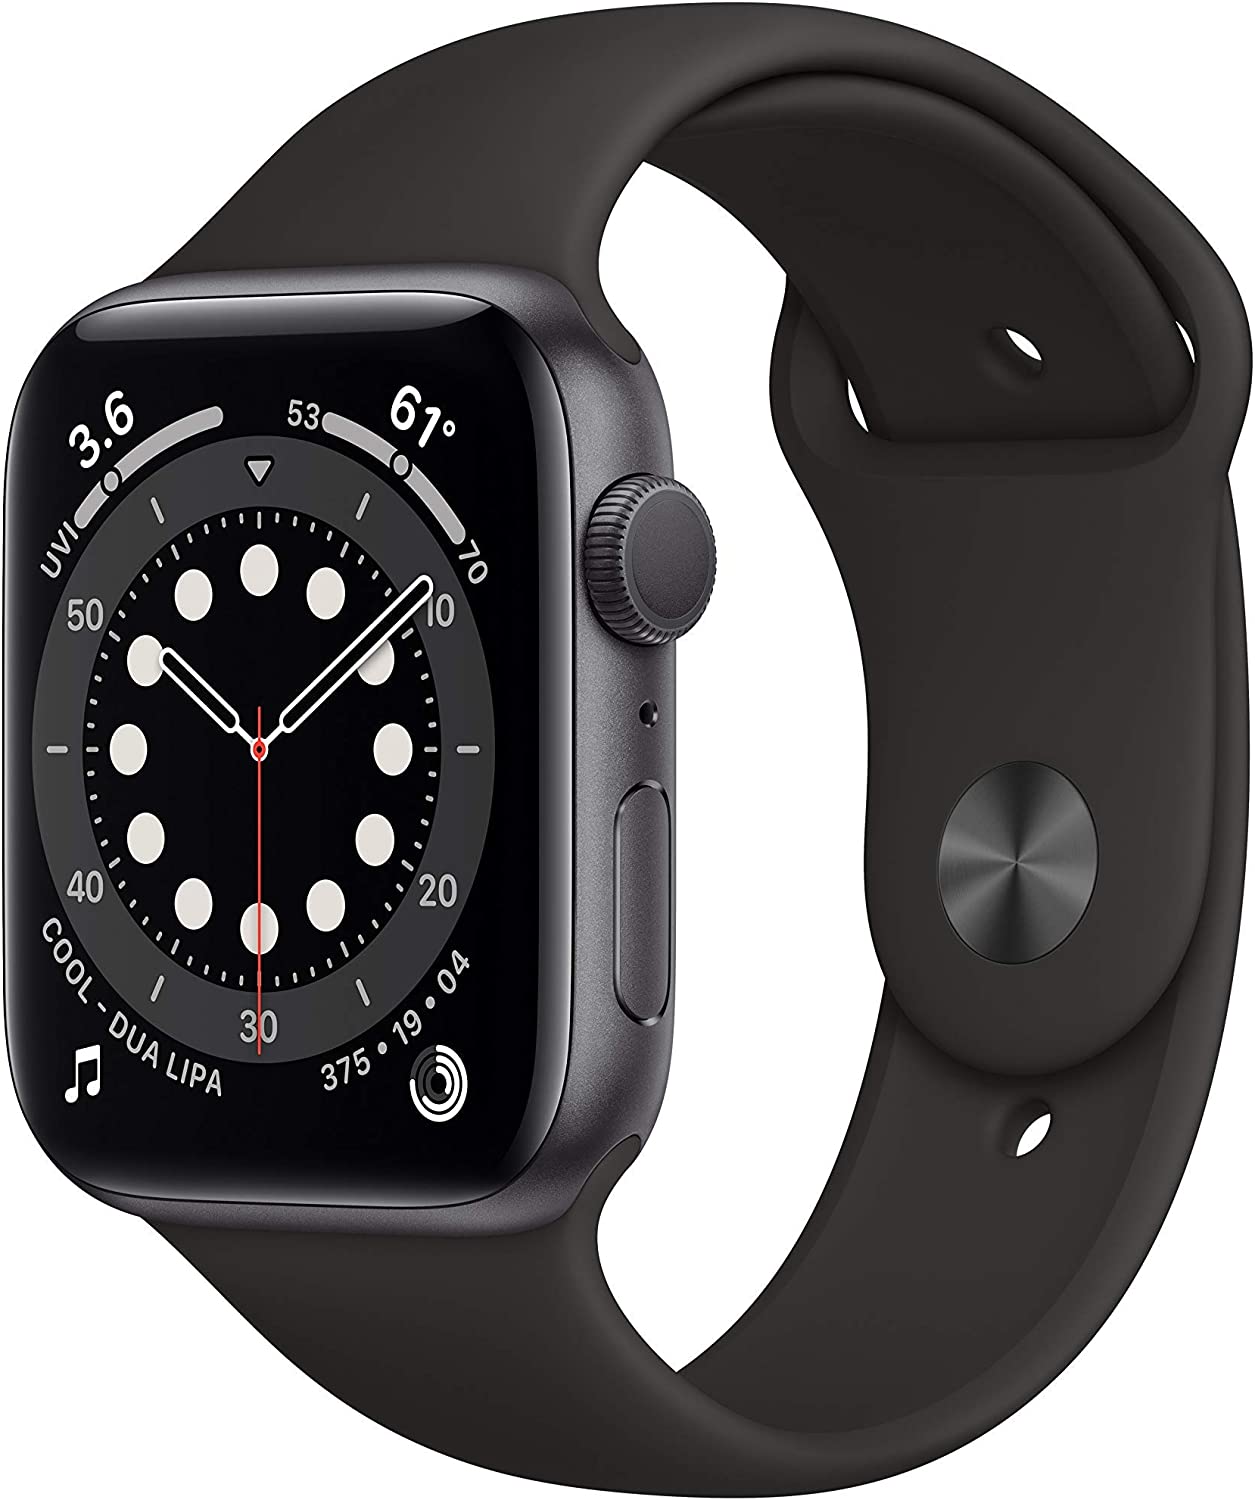 Renewed 44mm Apple Watch Series 6 GPS Space Gray Aluminum with Black Sports Band